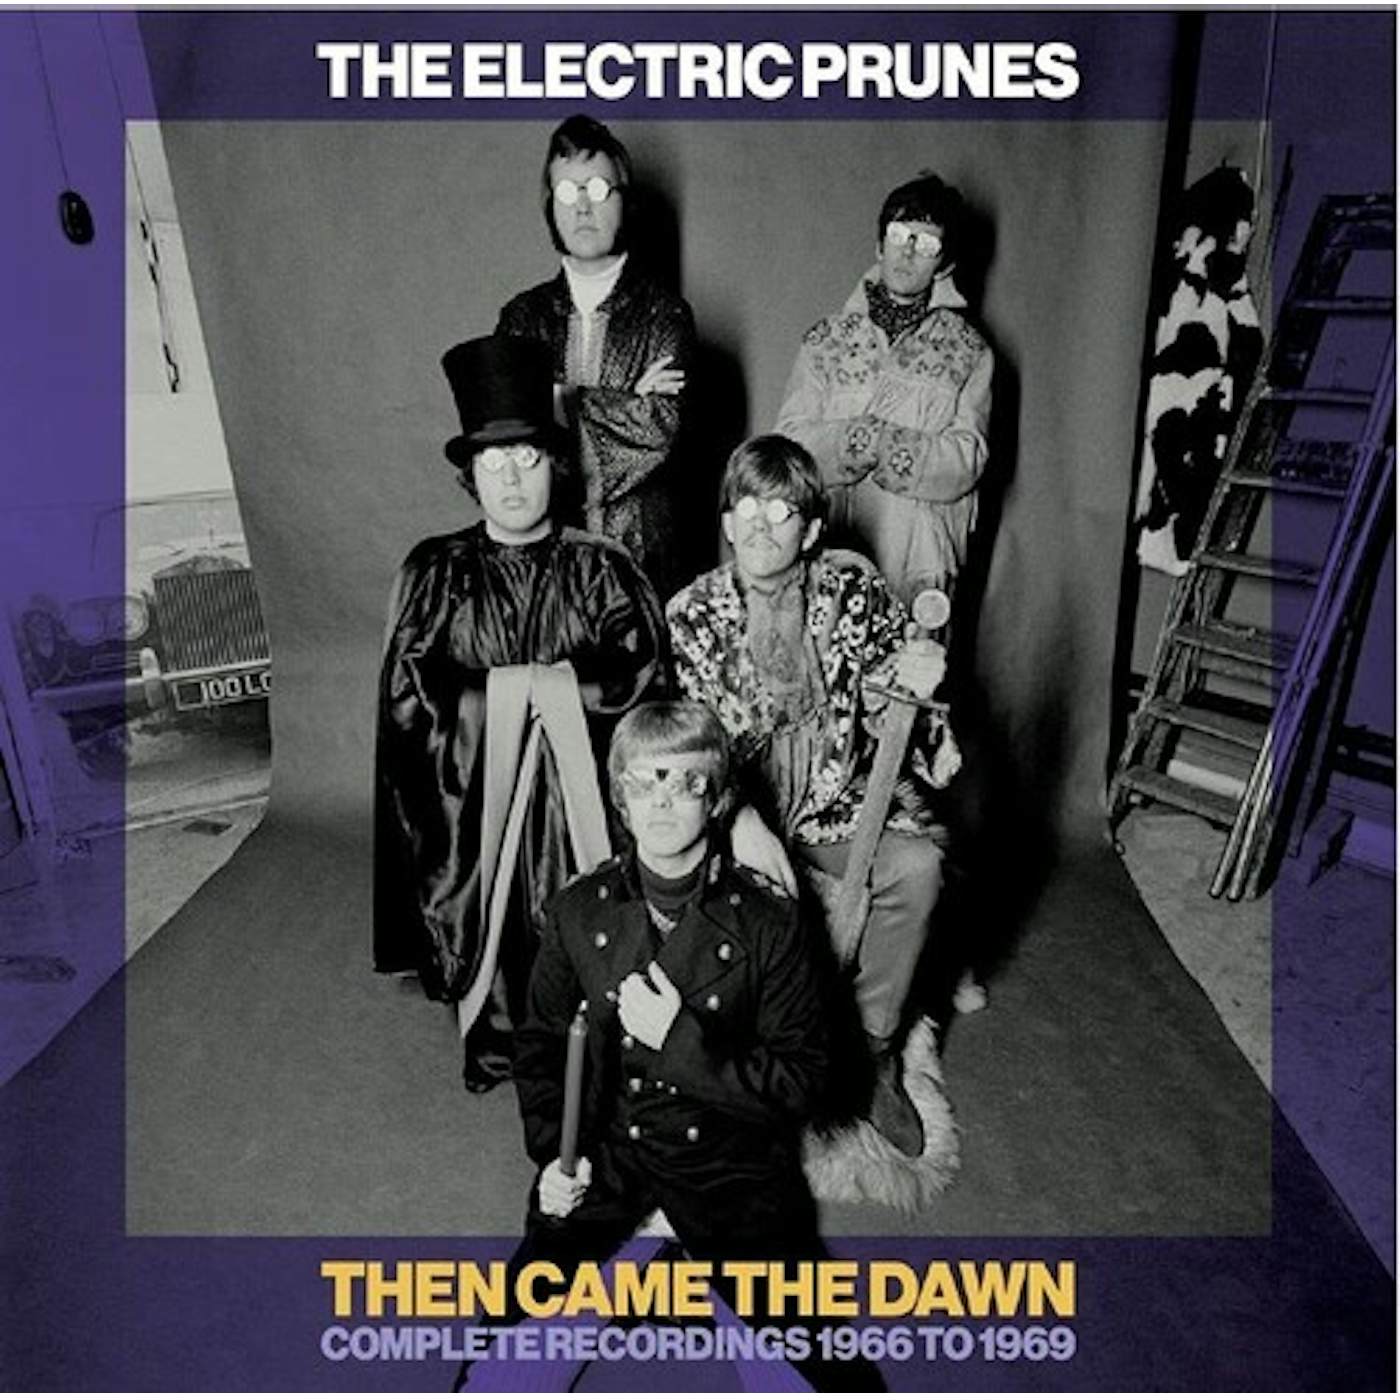 The Electric Prunes THEN CAME THE DAWN: COMPLETE RECORDINGS 1966-1969 CD